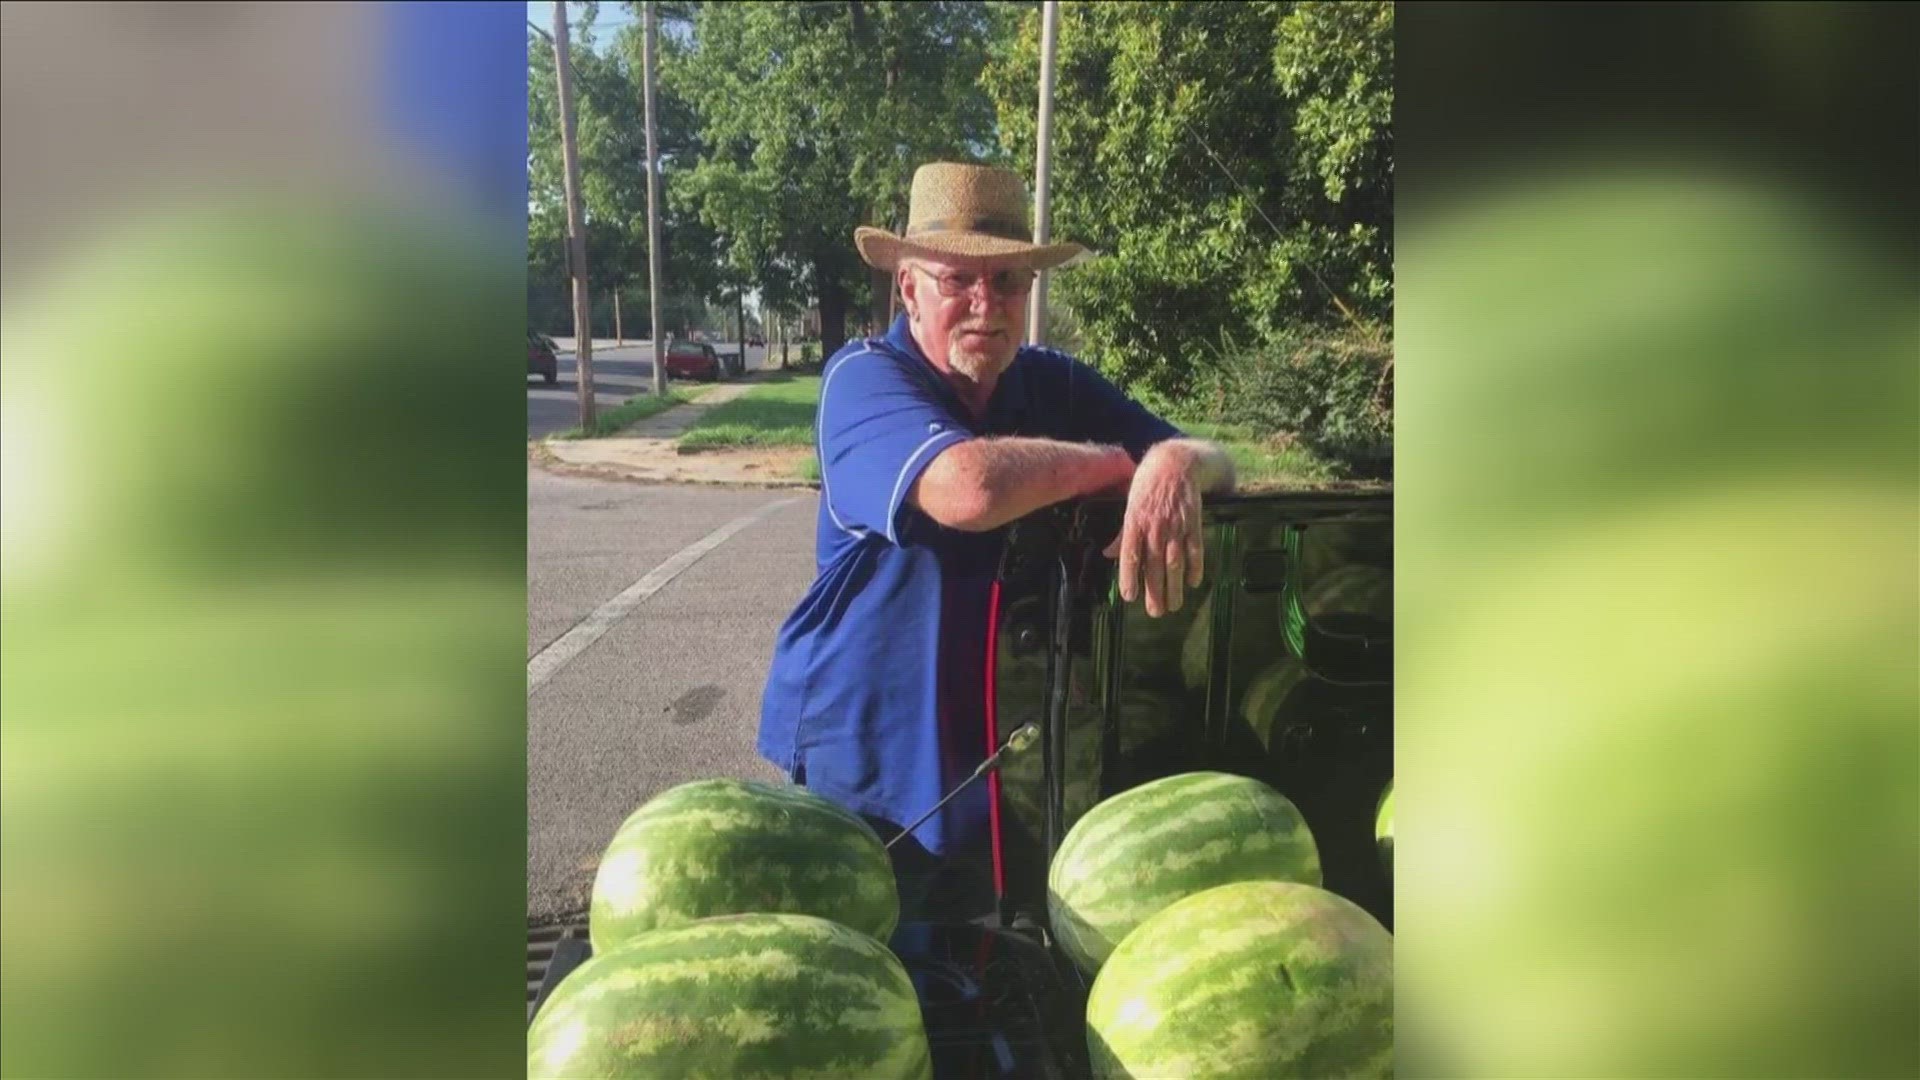 John Materna spent 30 years selling watermelons at Homer and Wayne, he was shot there May 15th, and died two weeks later.